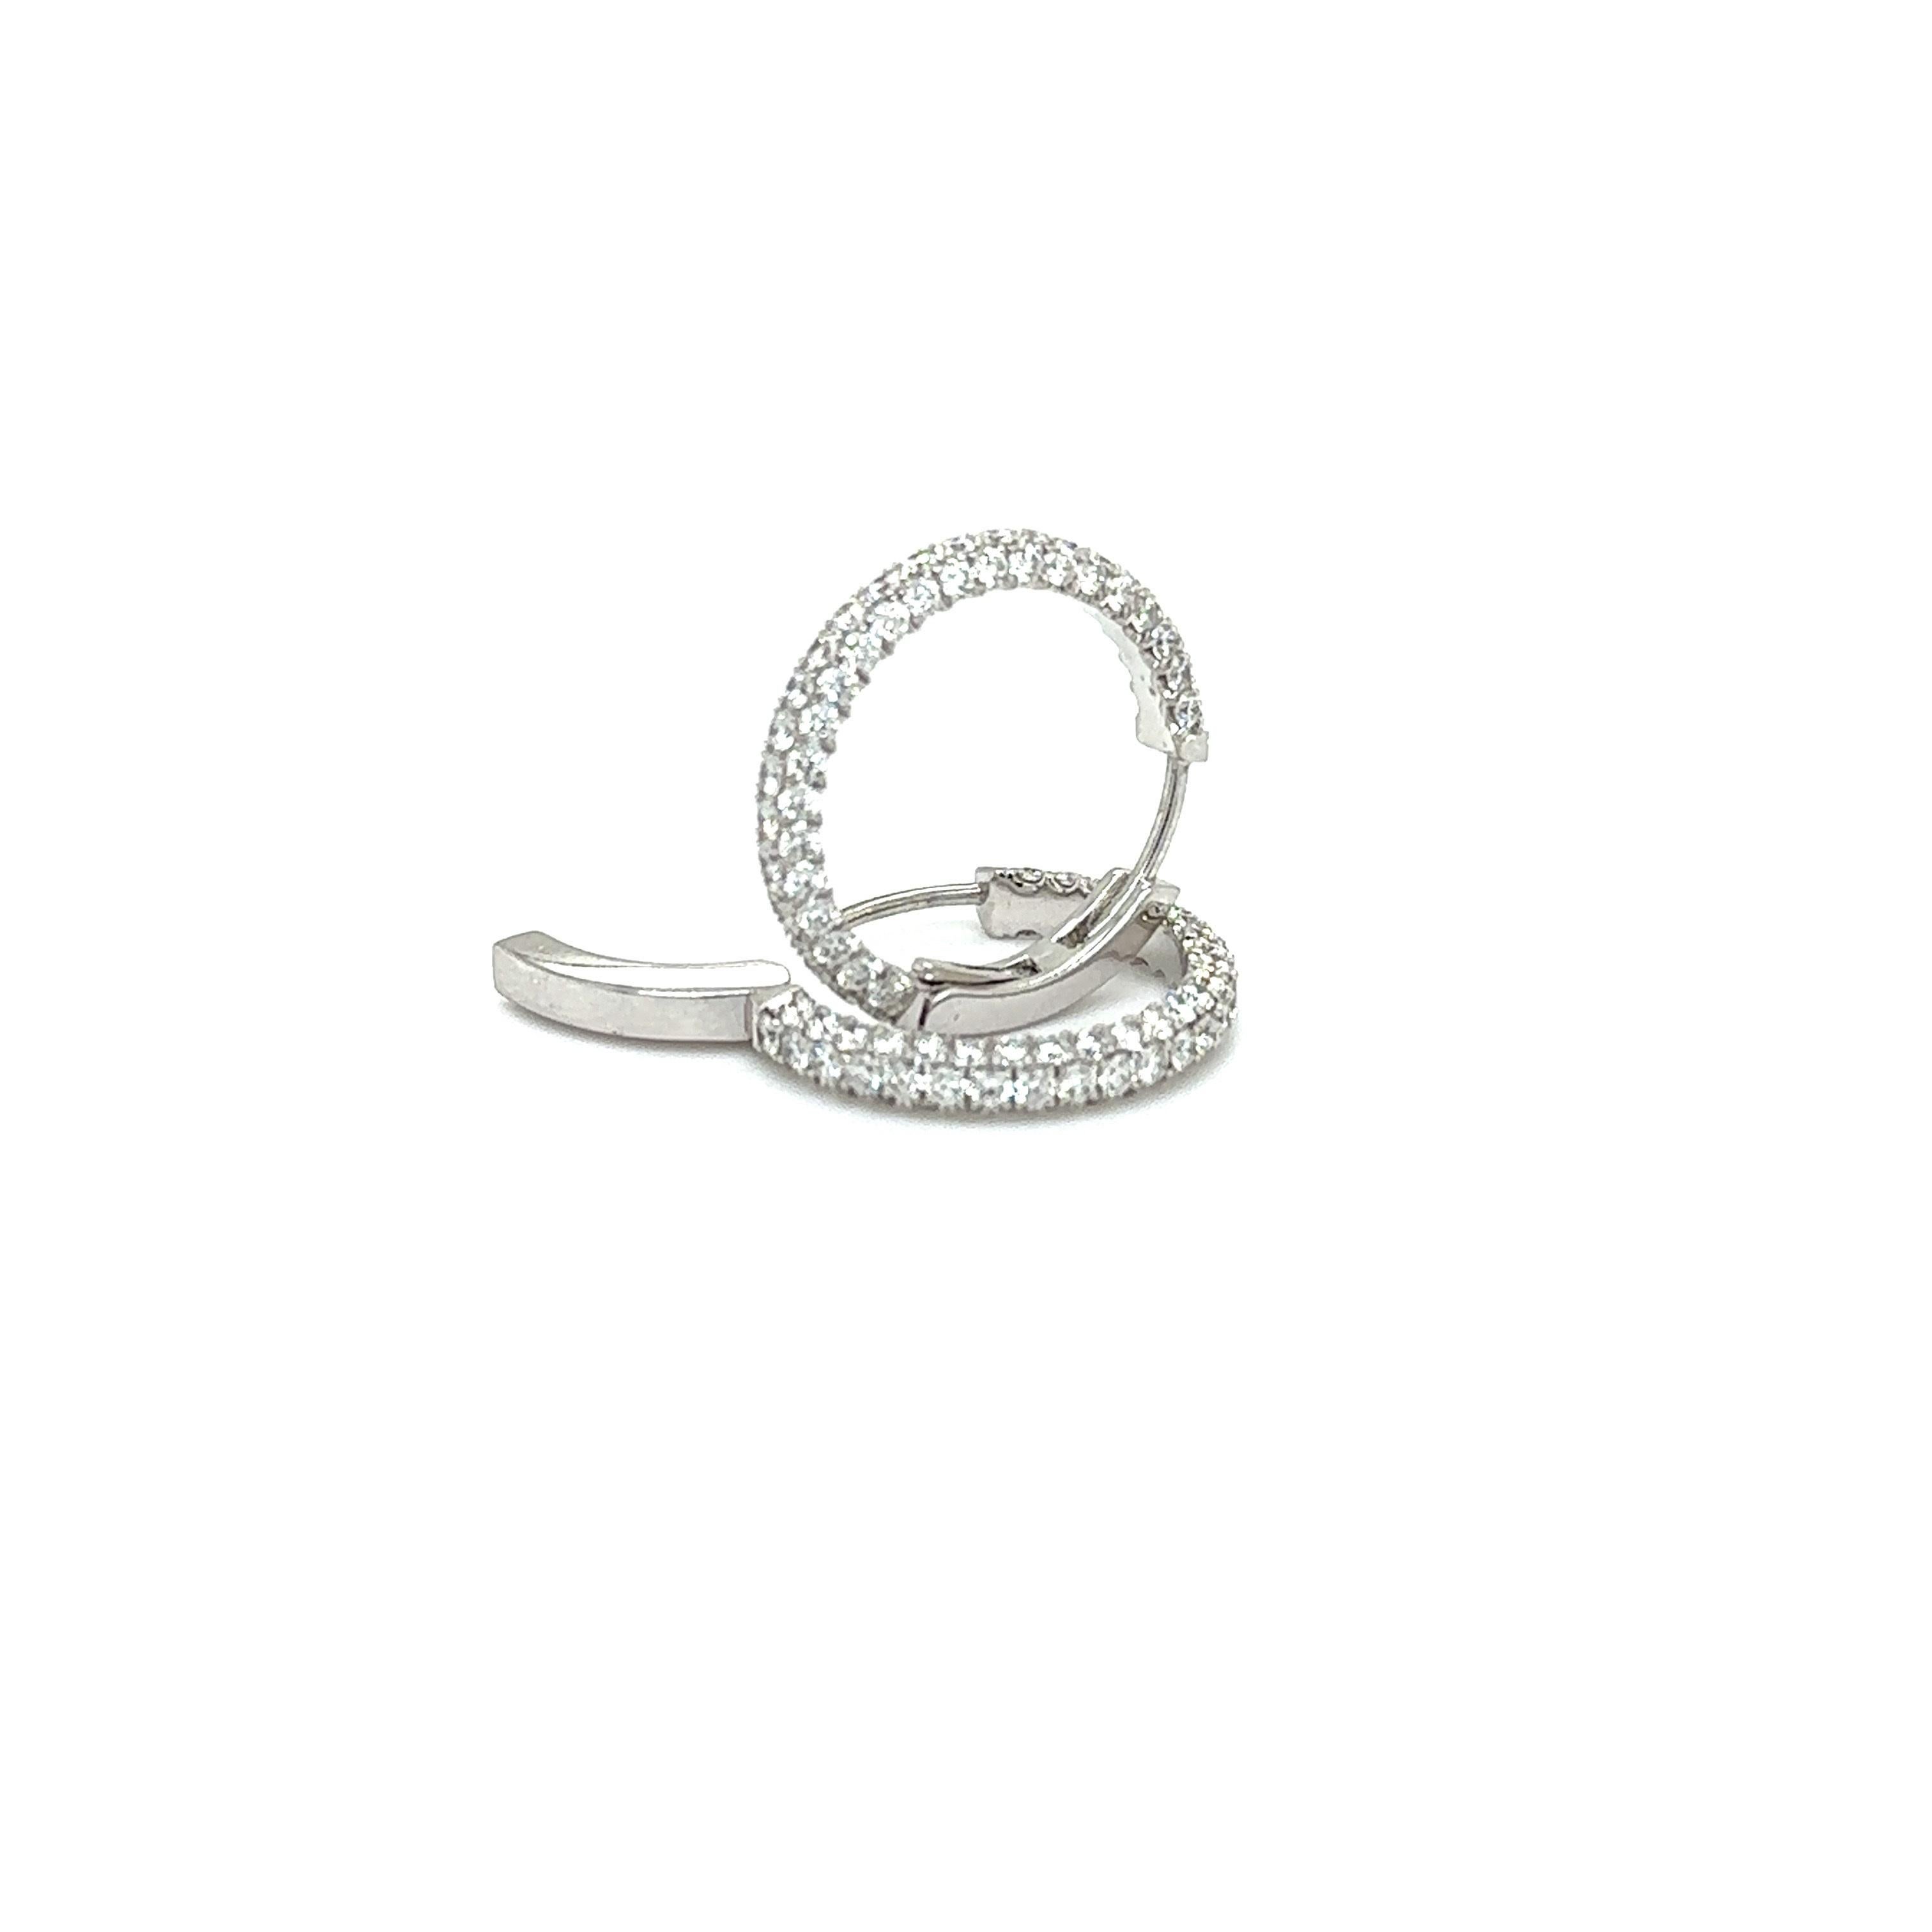 TRILLIAN COLLECTION MICRO PAVE 18K WHITE 3 Row Hoop Earrings

Metal: 18K White Gold
Diamond Info: G SI, 140 Round Brilliant Diamonds
Total Ct Weight: 2.24 cwt.
Item Weight: 5.43 gm
Measurements: 20.20 mm x 3.00 mm 
